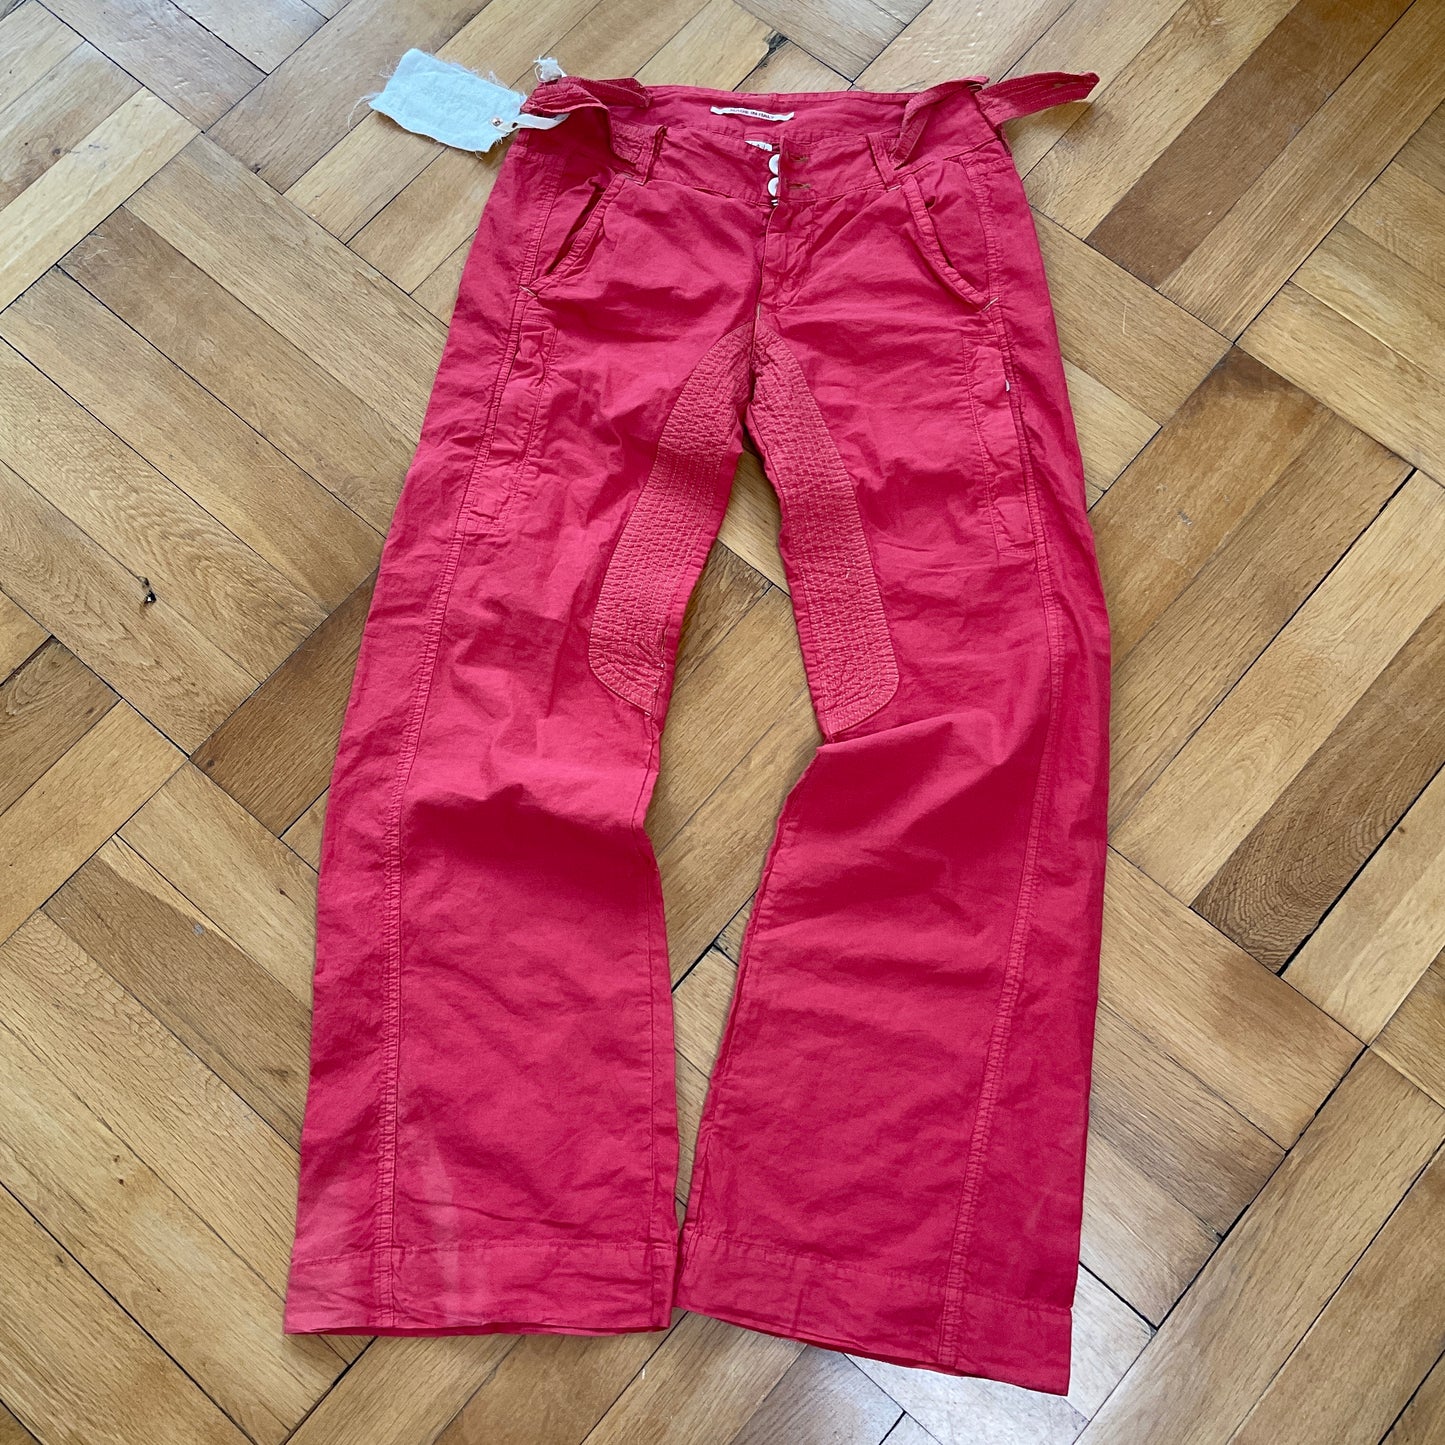 Red cargo pants